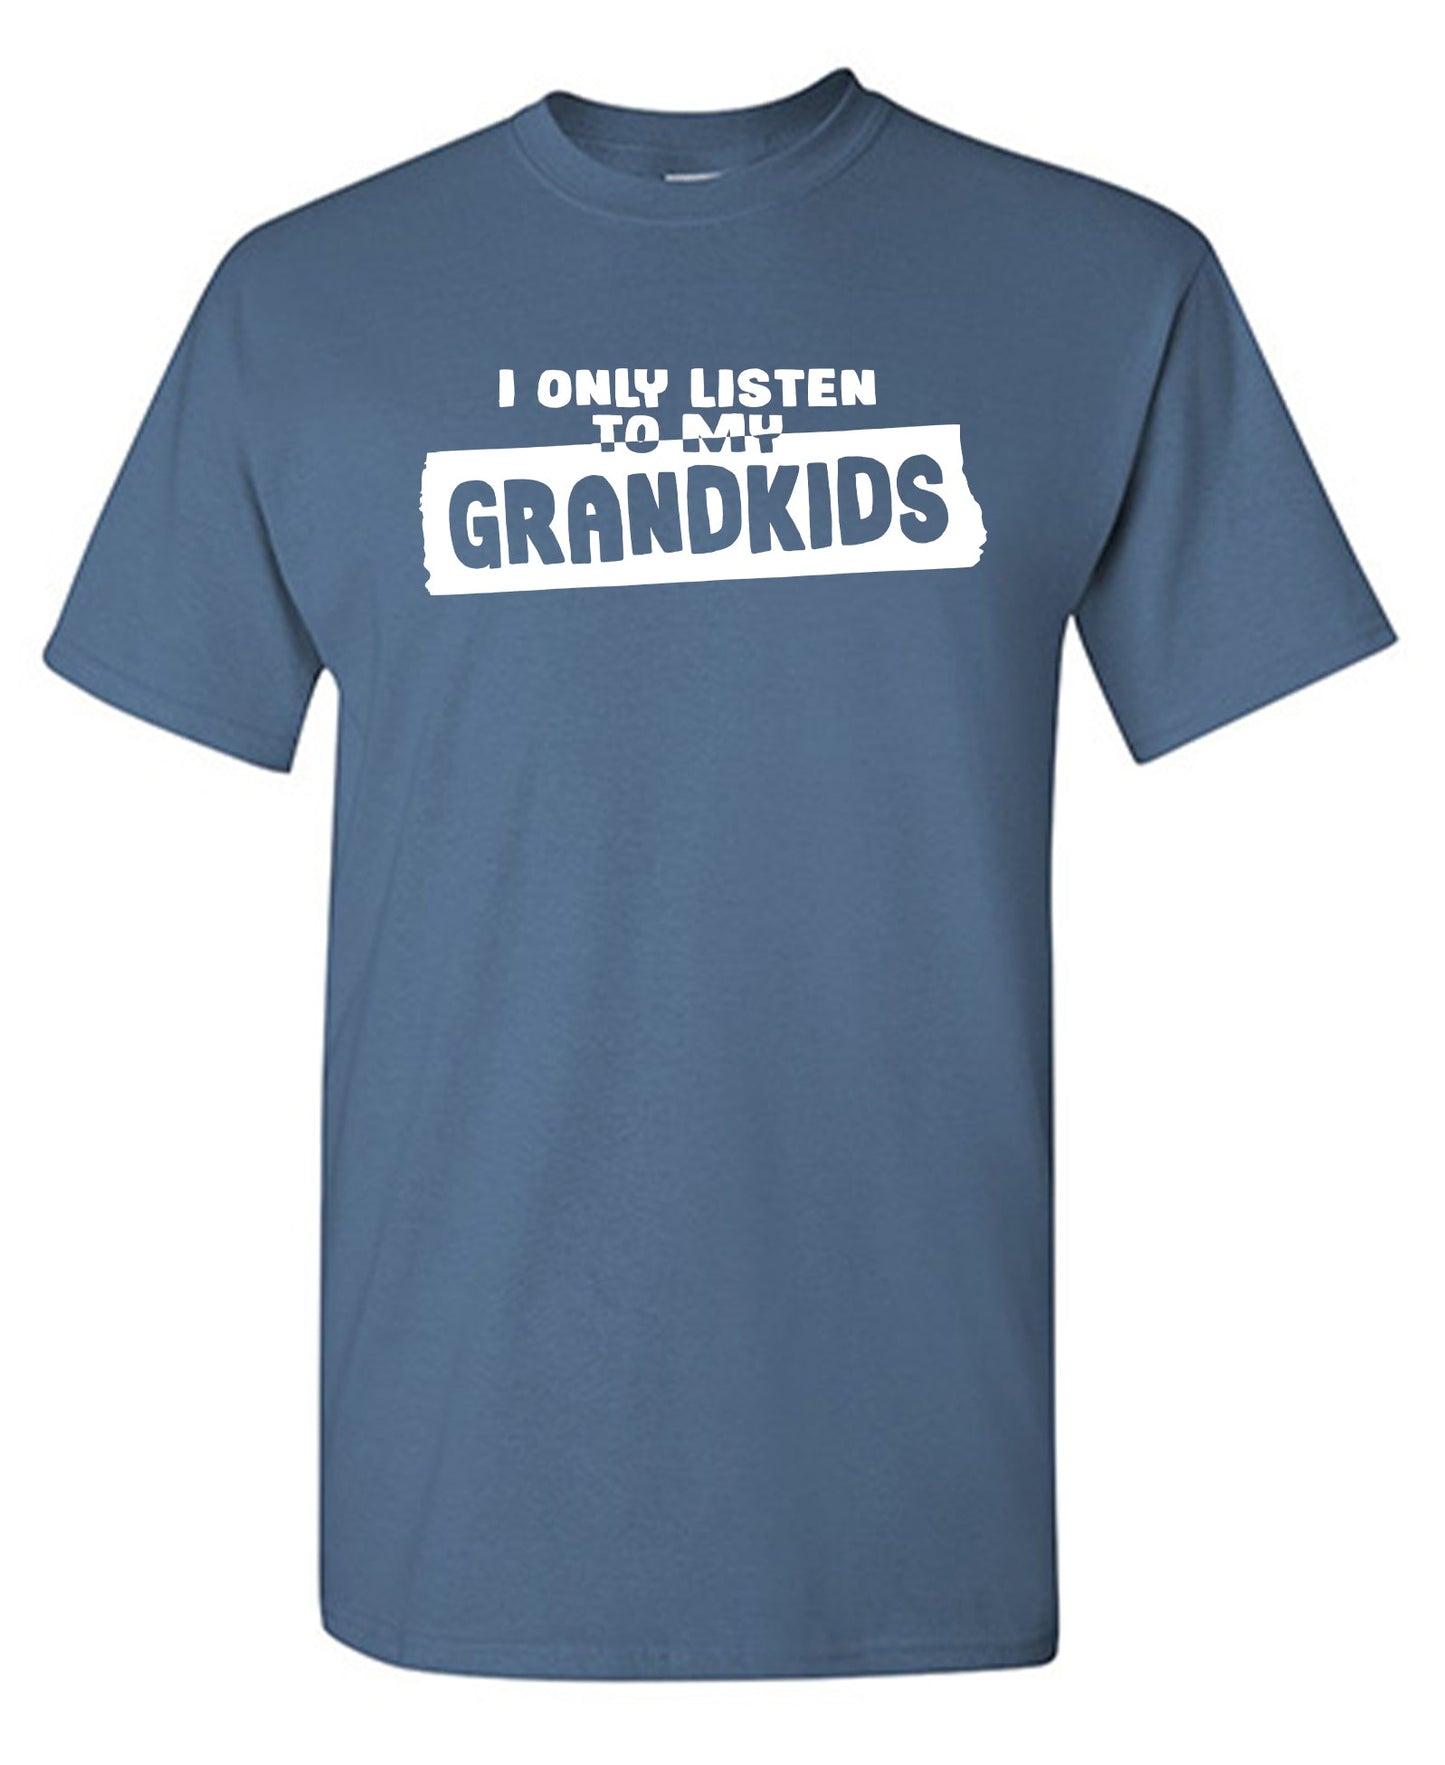 I Only Listen To My Grandkids - Funny T Shirts & Graphic Tees